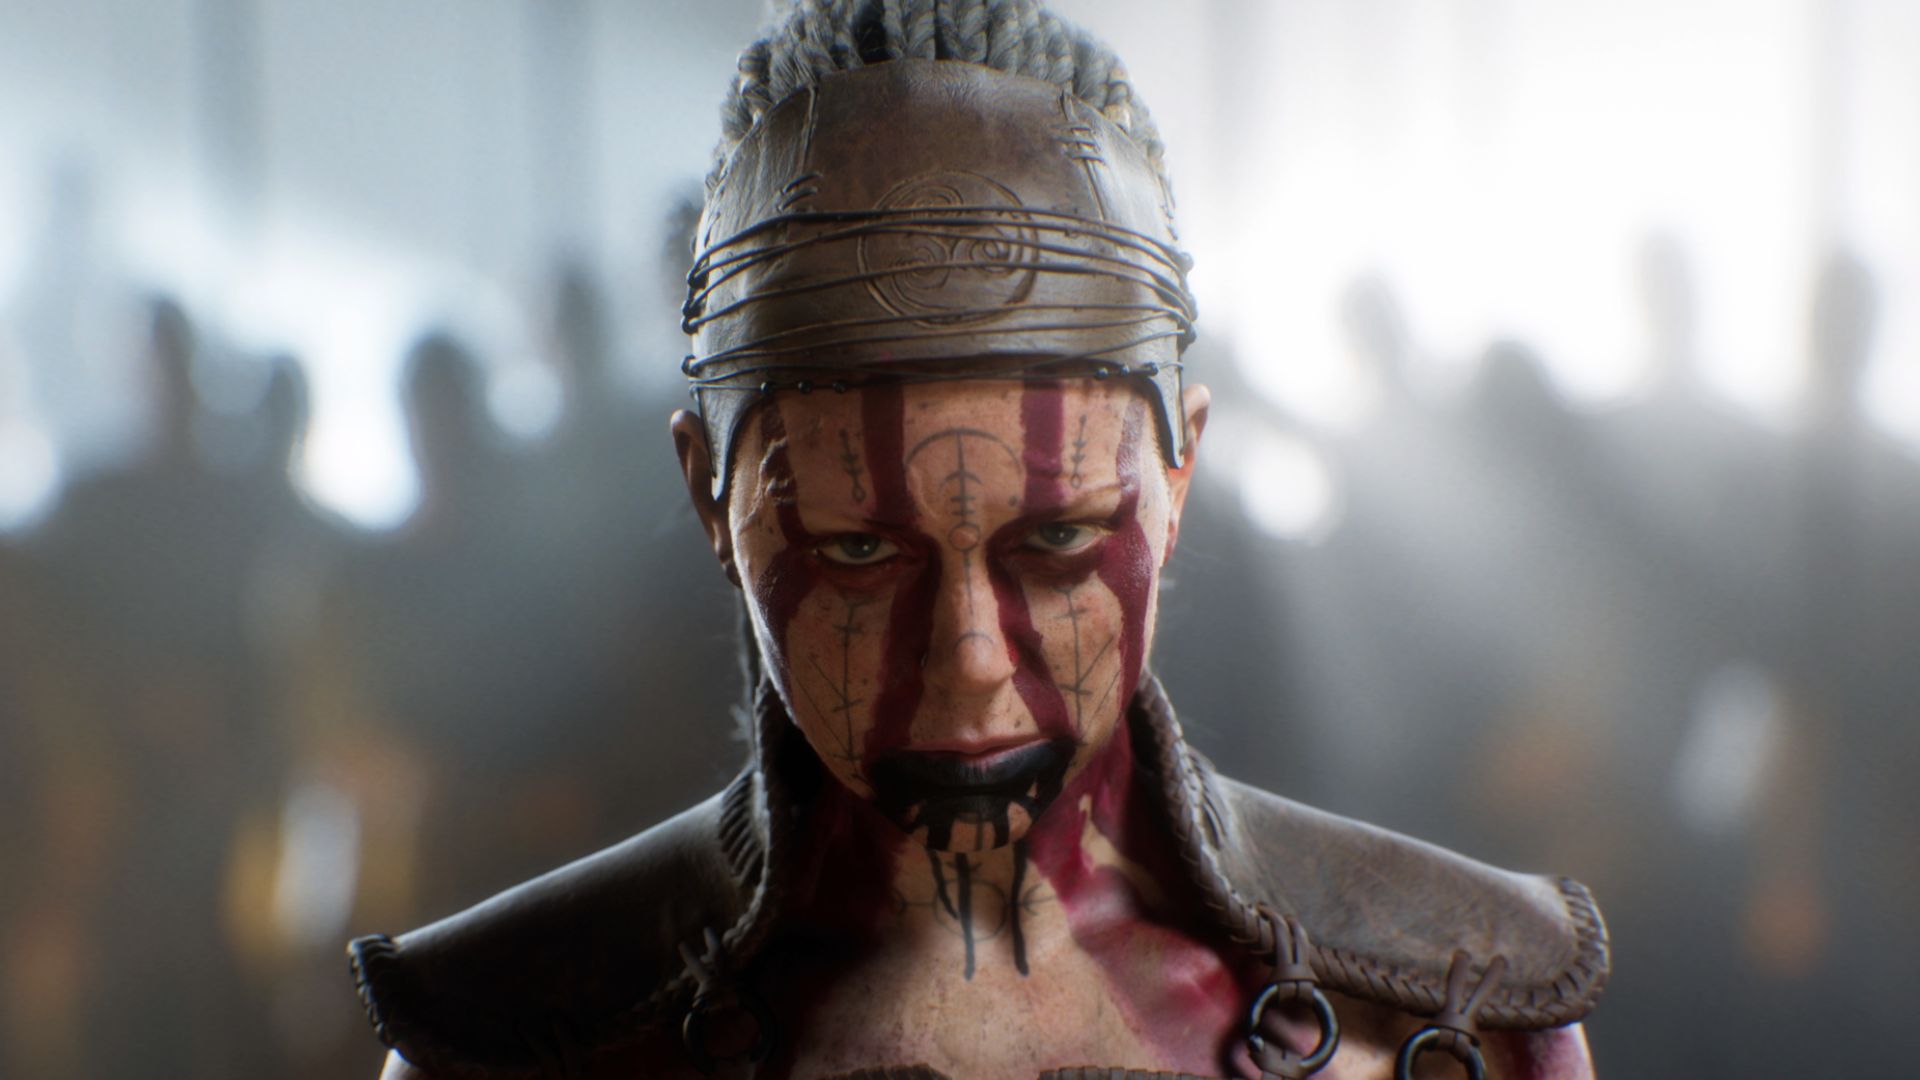 You'll see Hellblade 2 and three more Xbox games next week